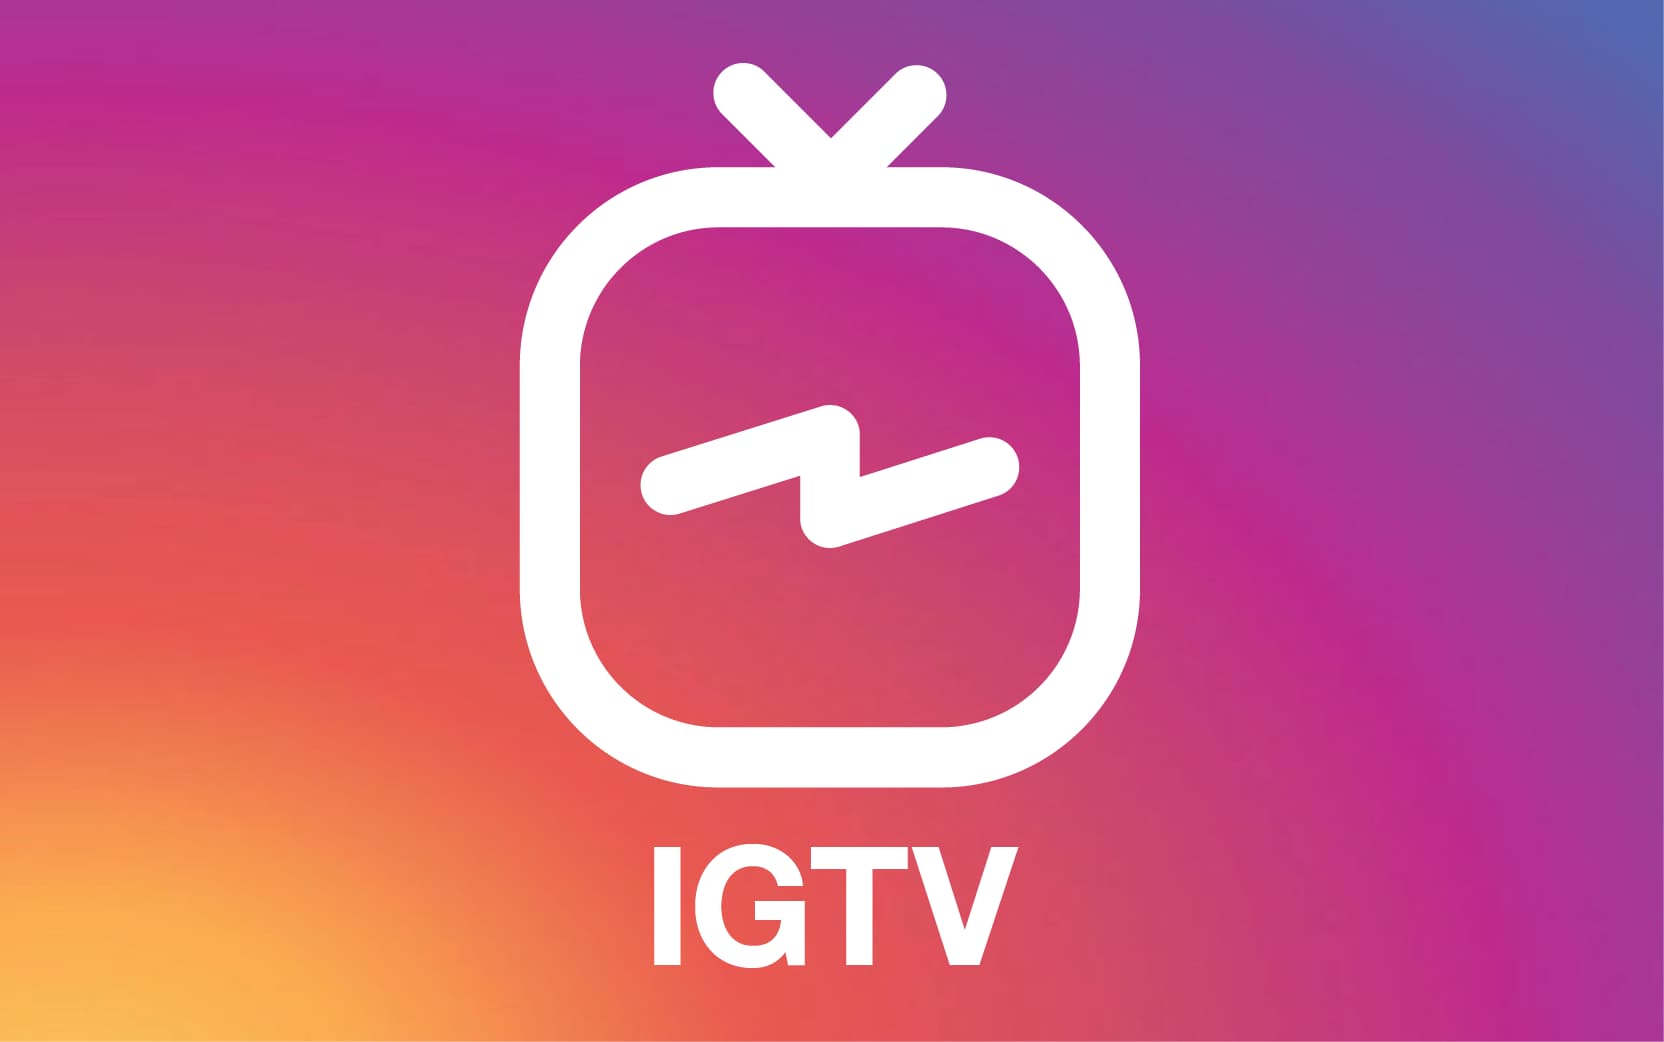 IGTV tutorial, Instagram TV guide, IGTV best practices, IGTV video tips, Instagram video marketing, How to use IGTV, IGTV content strategy, IGTV for beginners, Instagram TV optimization, IGTV marketing ideas, What is IGTV, IGTV analytics, Create an IGTV series, IGTV tips